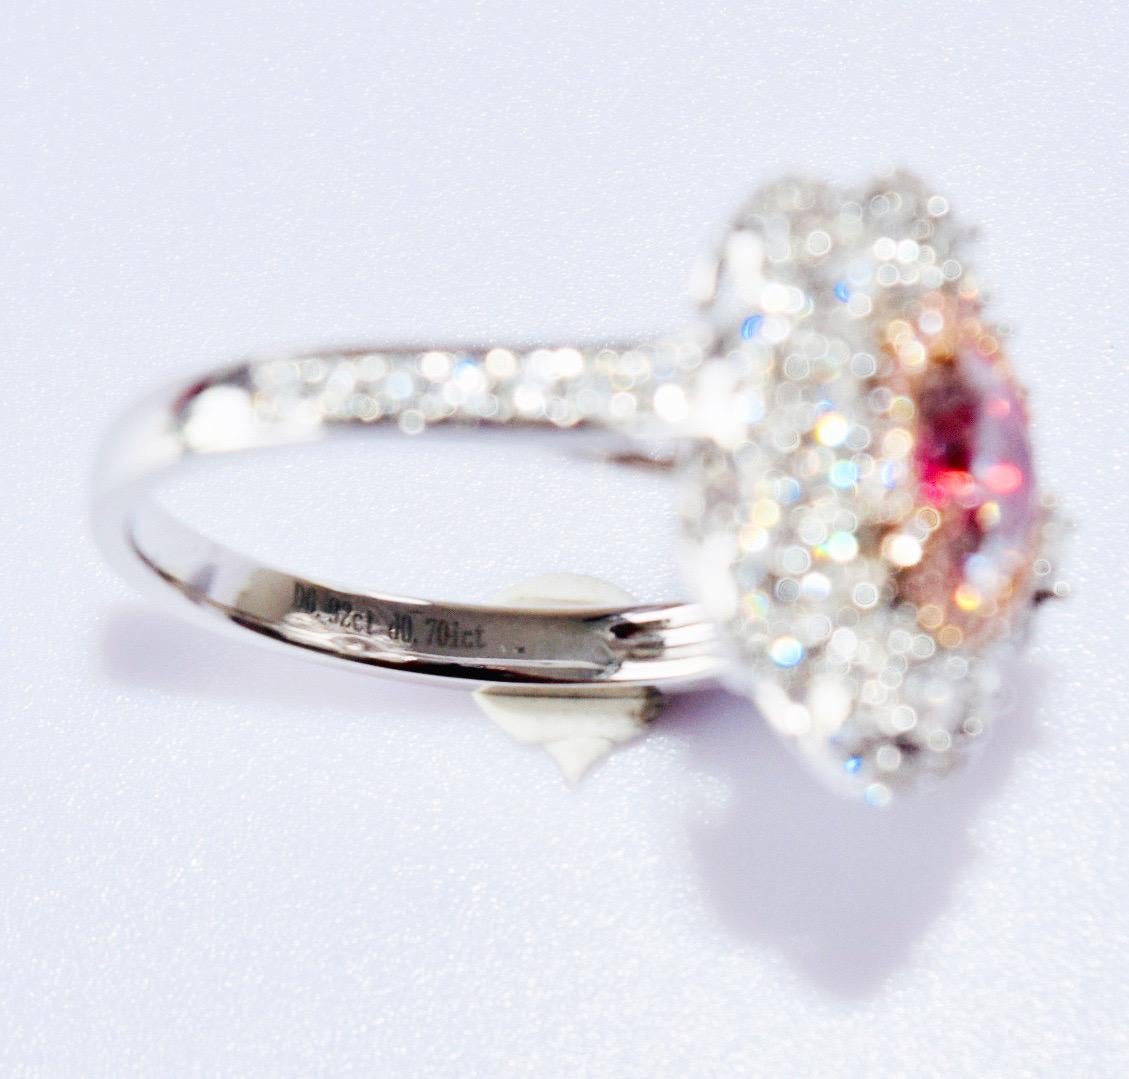 0.92 Carat Very Light Pink Diamond Ring VS2 Clarity GIA Certified For Sale 9